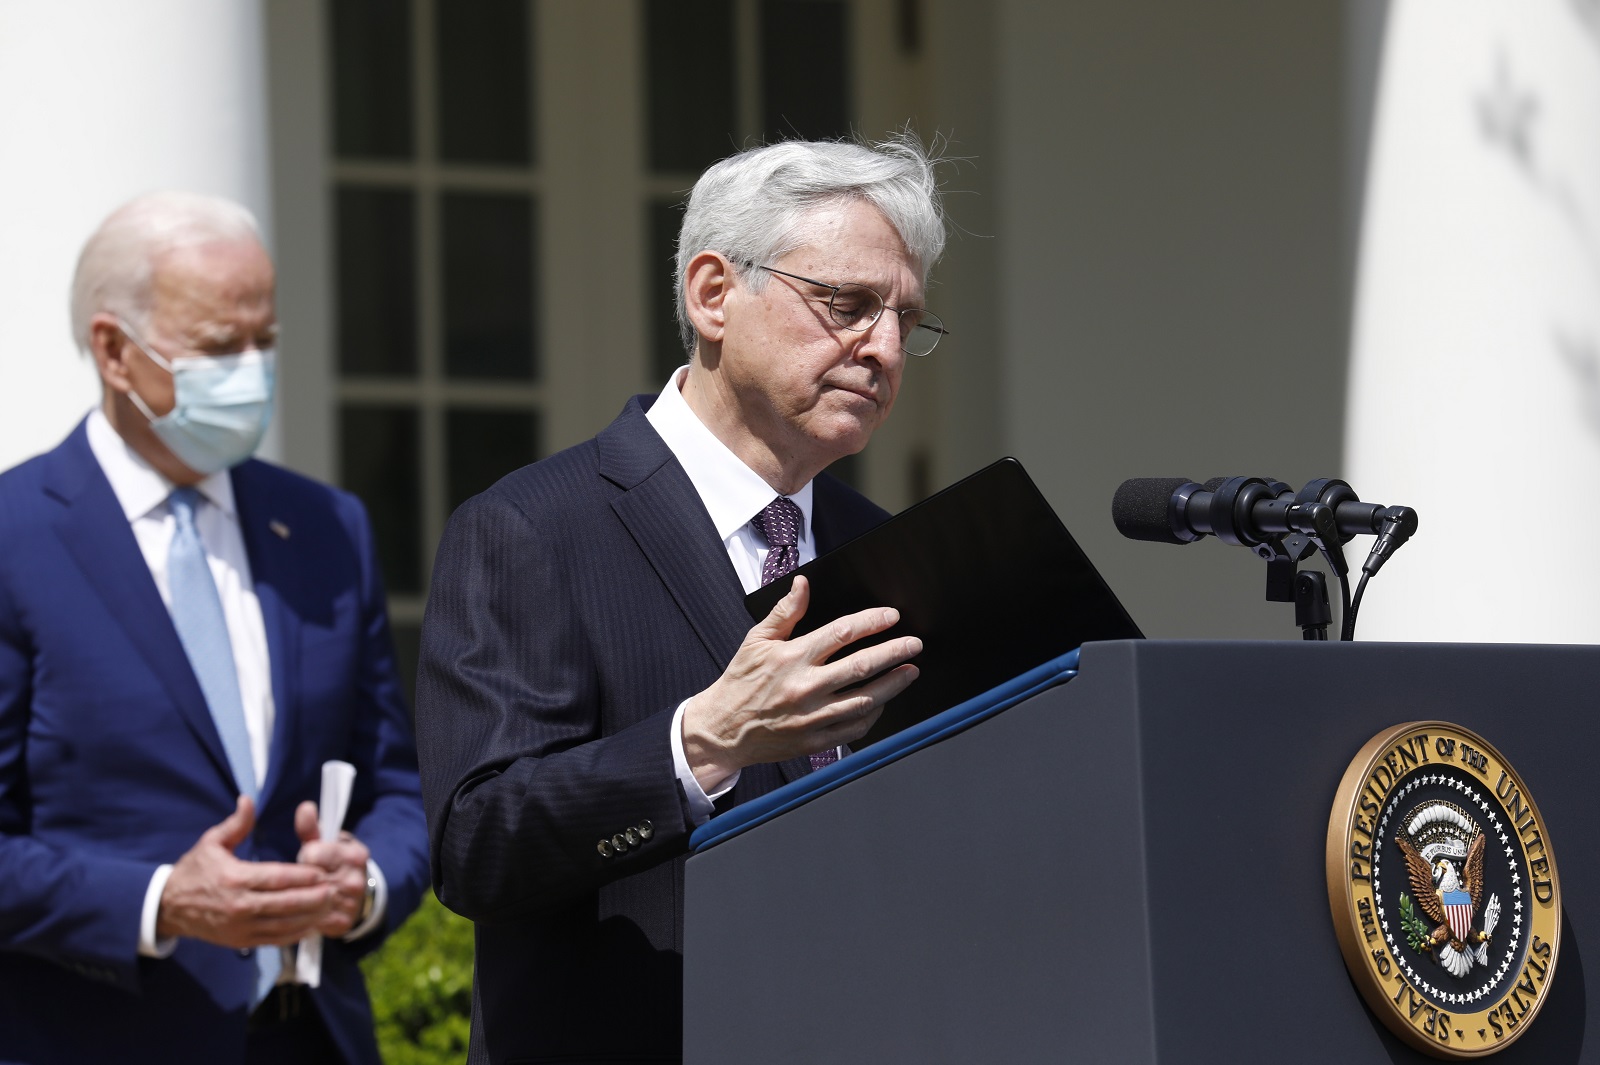 epa09122825 US Attorney General Merrick Garland delivers remarks on gun violence prevention in the Rose Garden of the White House in Washington, DC, USA, on 08 April 2021.  EPA/Yuri Gripas / POOL